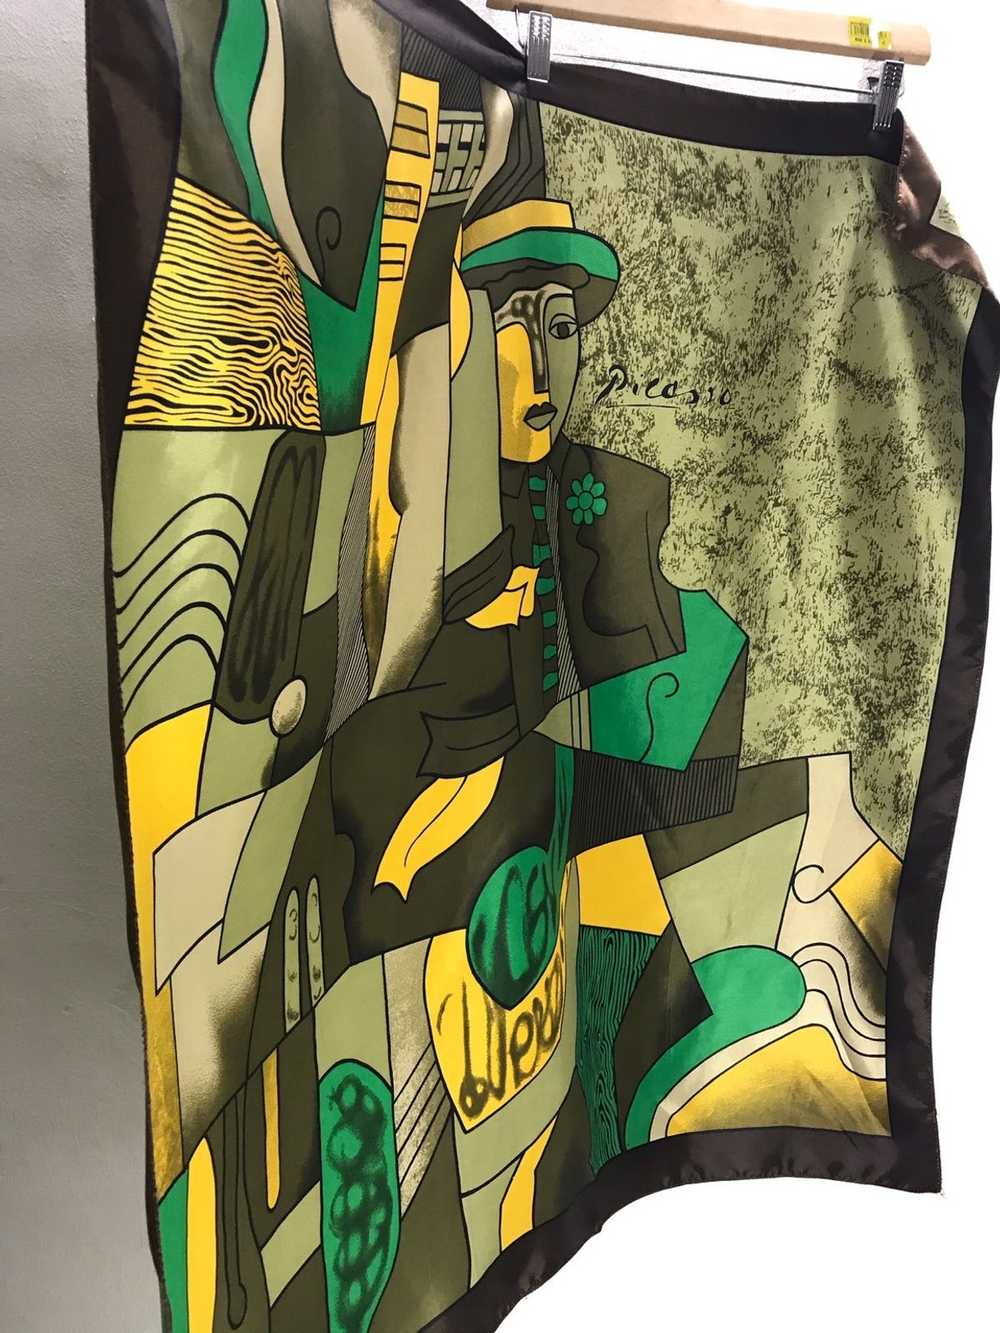 Picasso Vintage Japanese Brand Picasso scarf - image 2